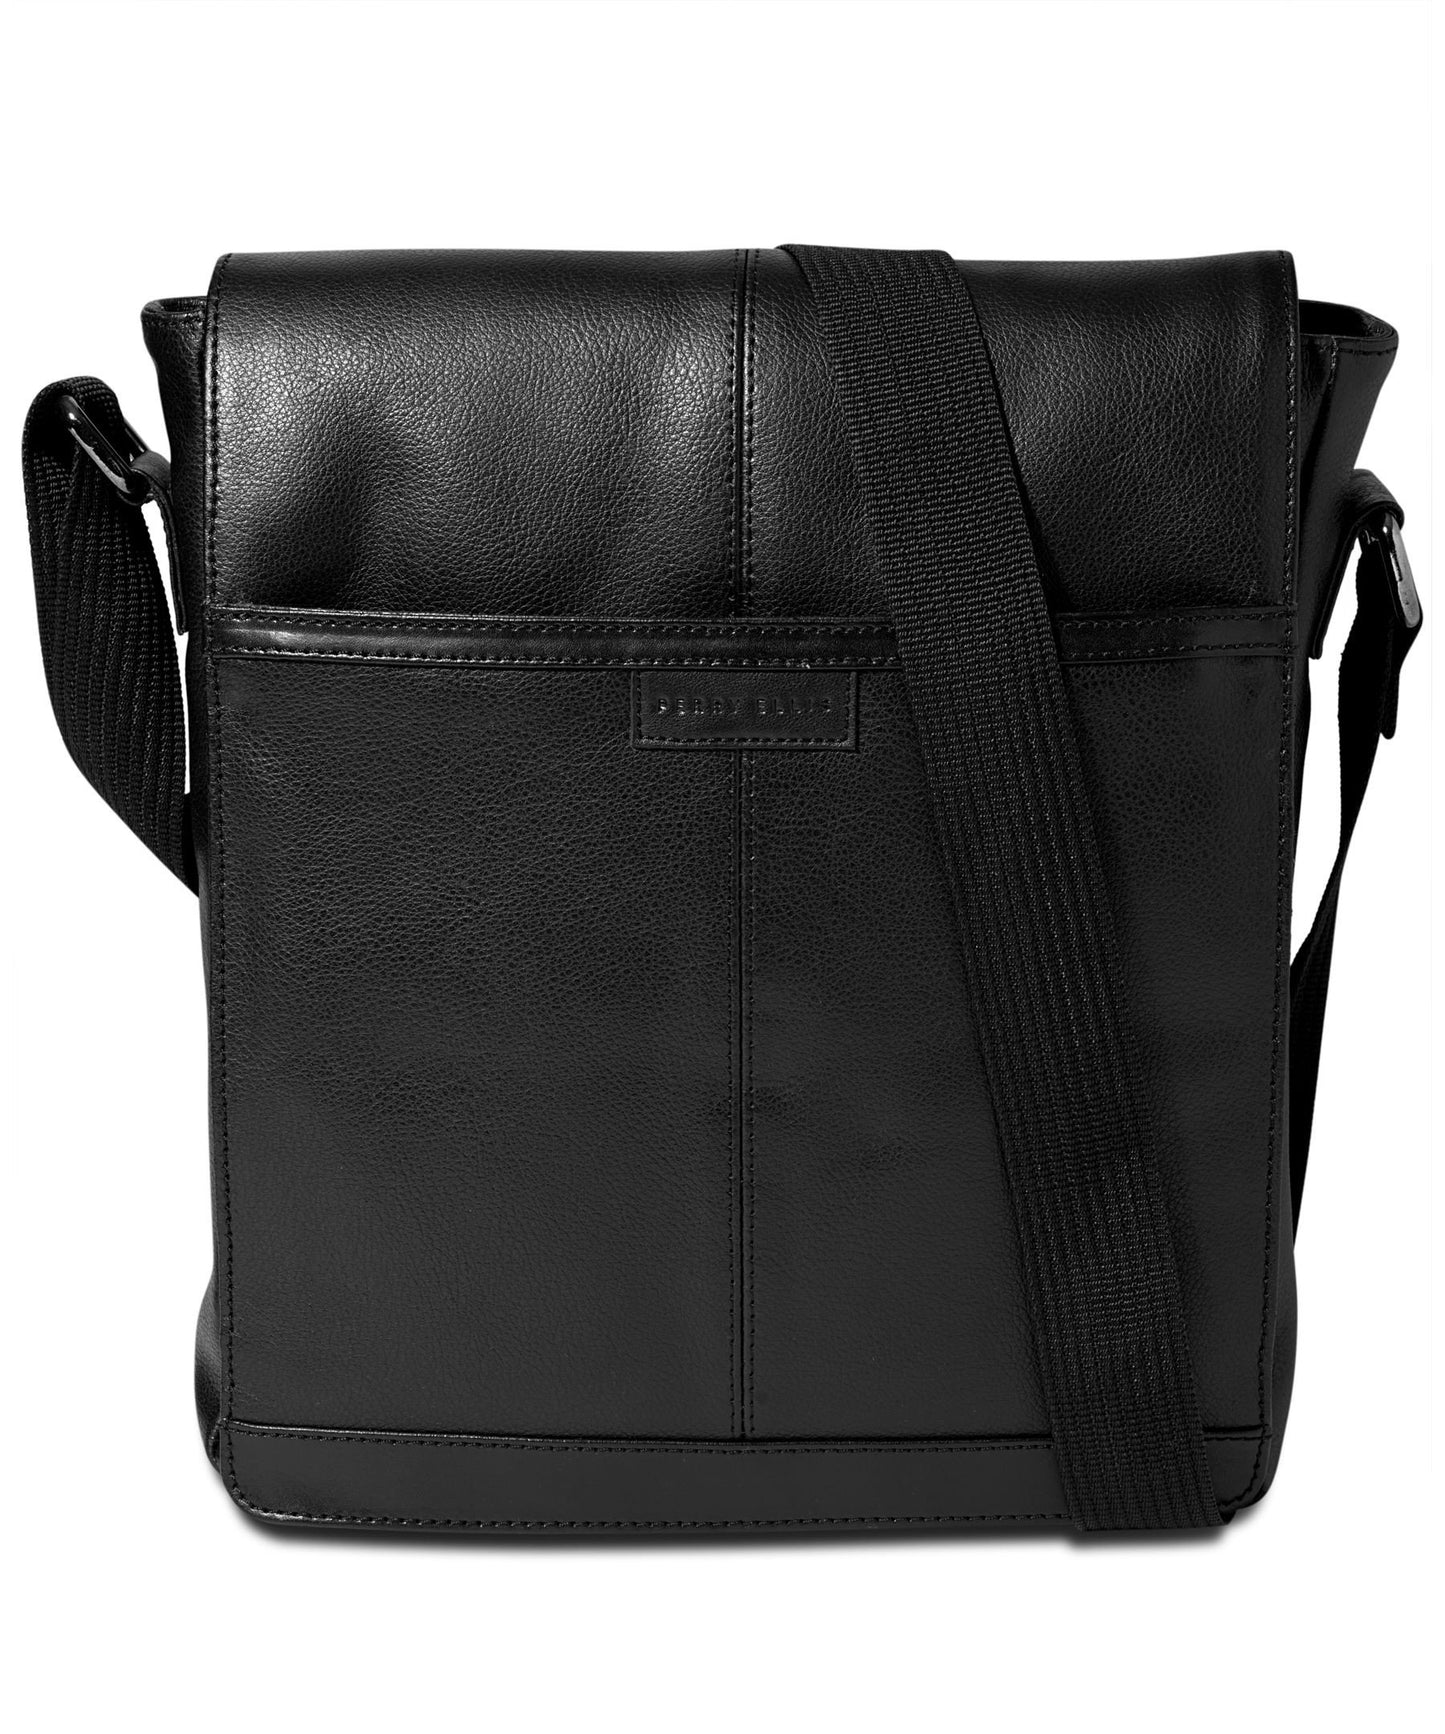 Perry Ellis Northsouth Leather Cross Body Bag Black One Size